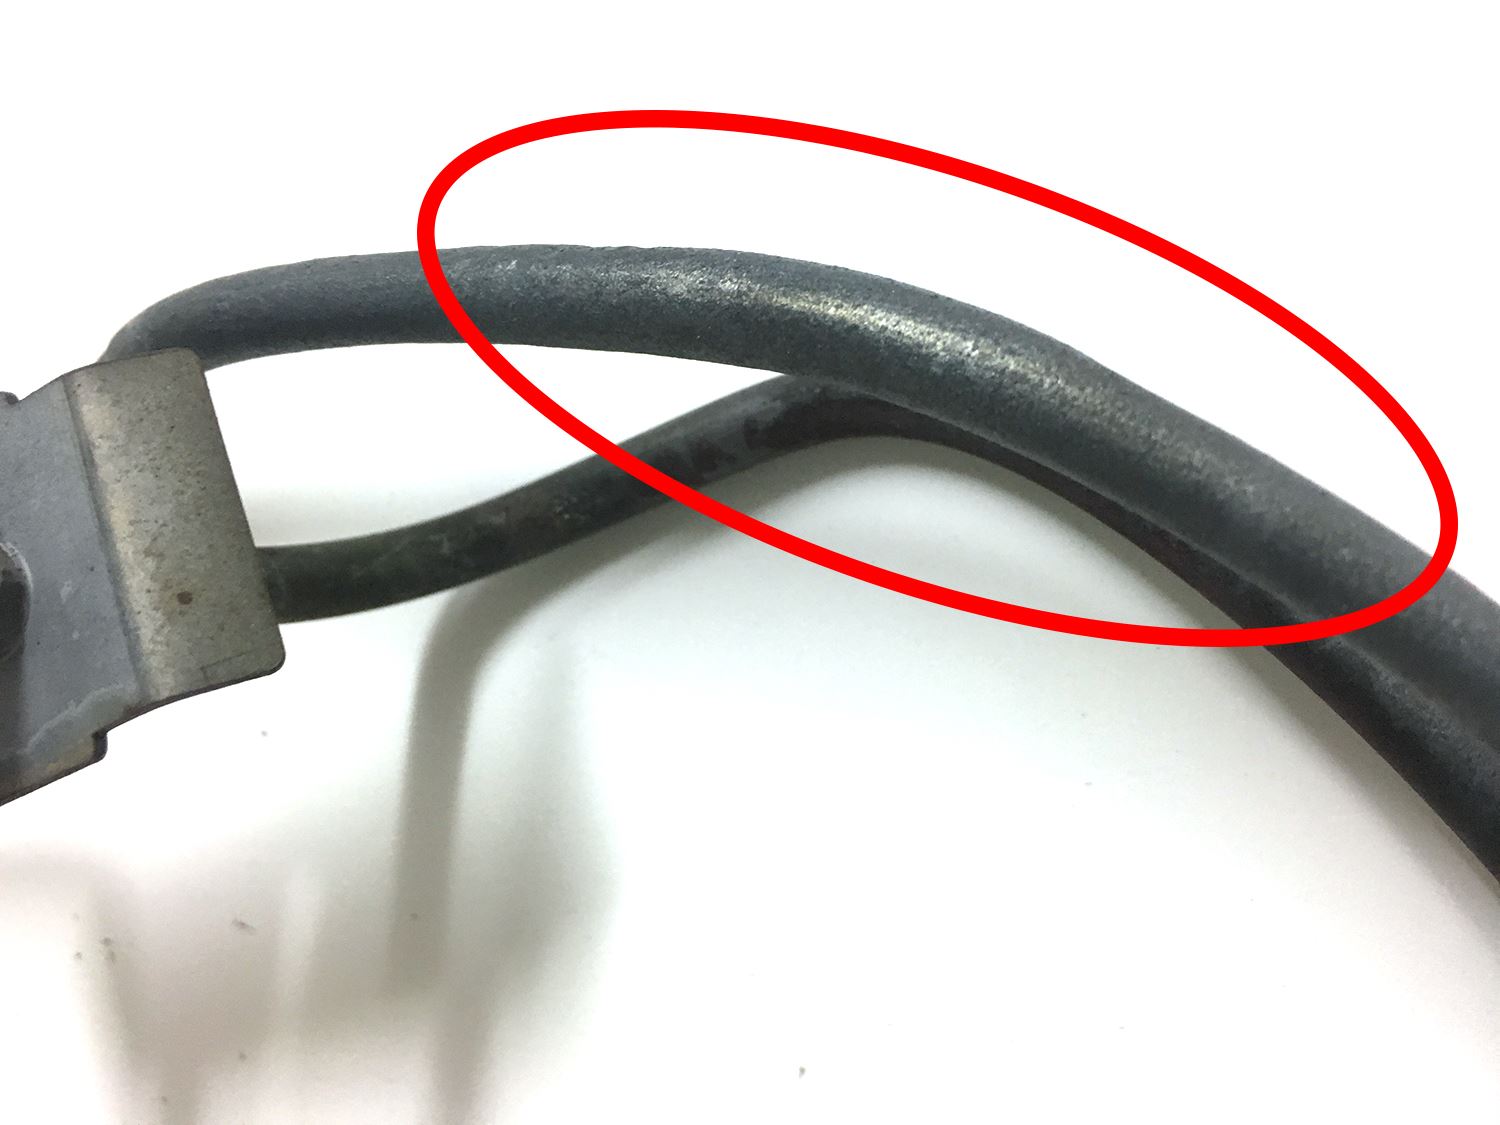 How To Fix A Broken Heating Element In An Oven How to Replace an Oven Element – Oven Not Heating? - Ransom Spares